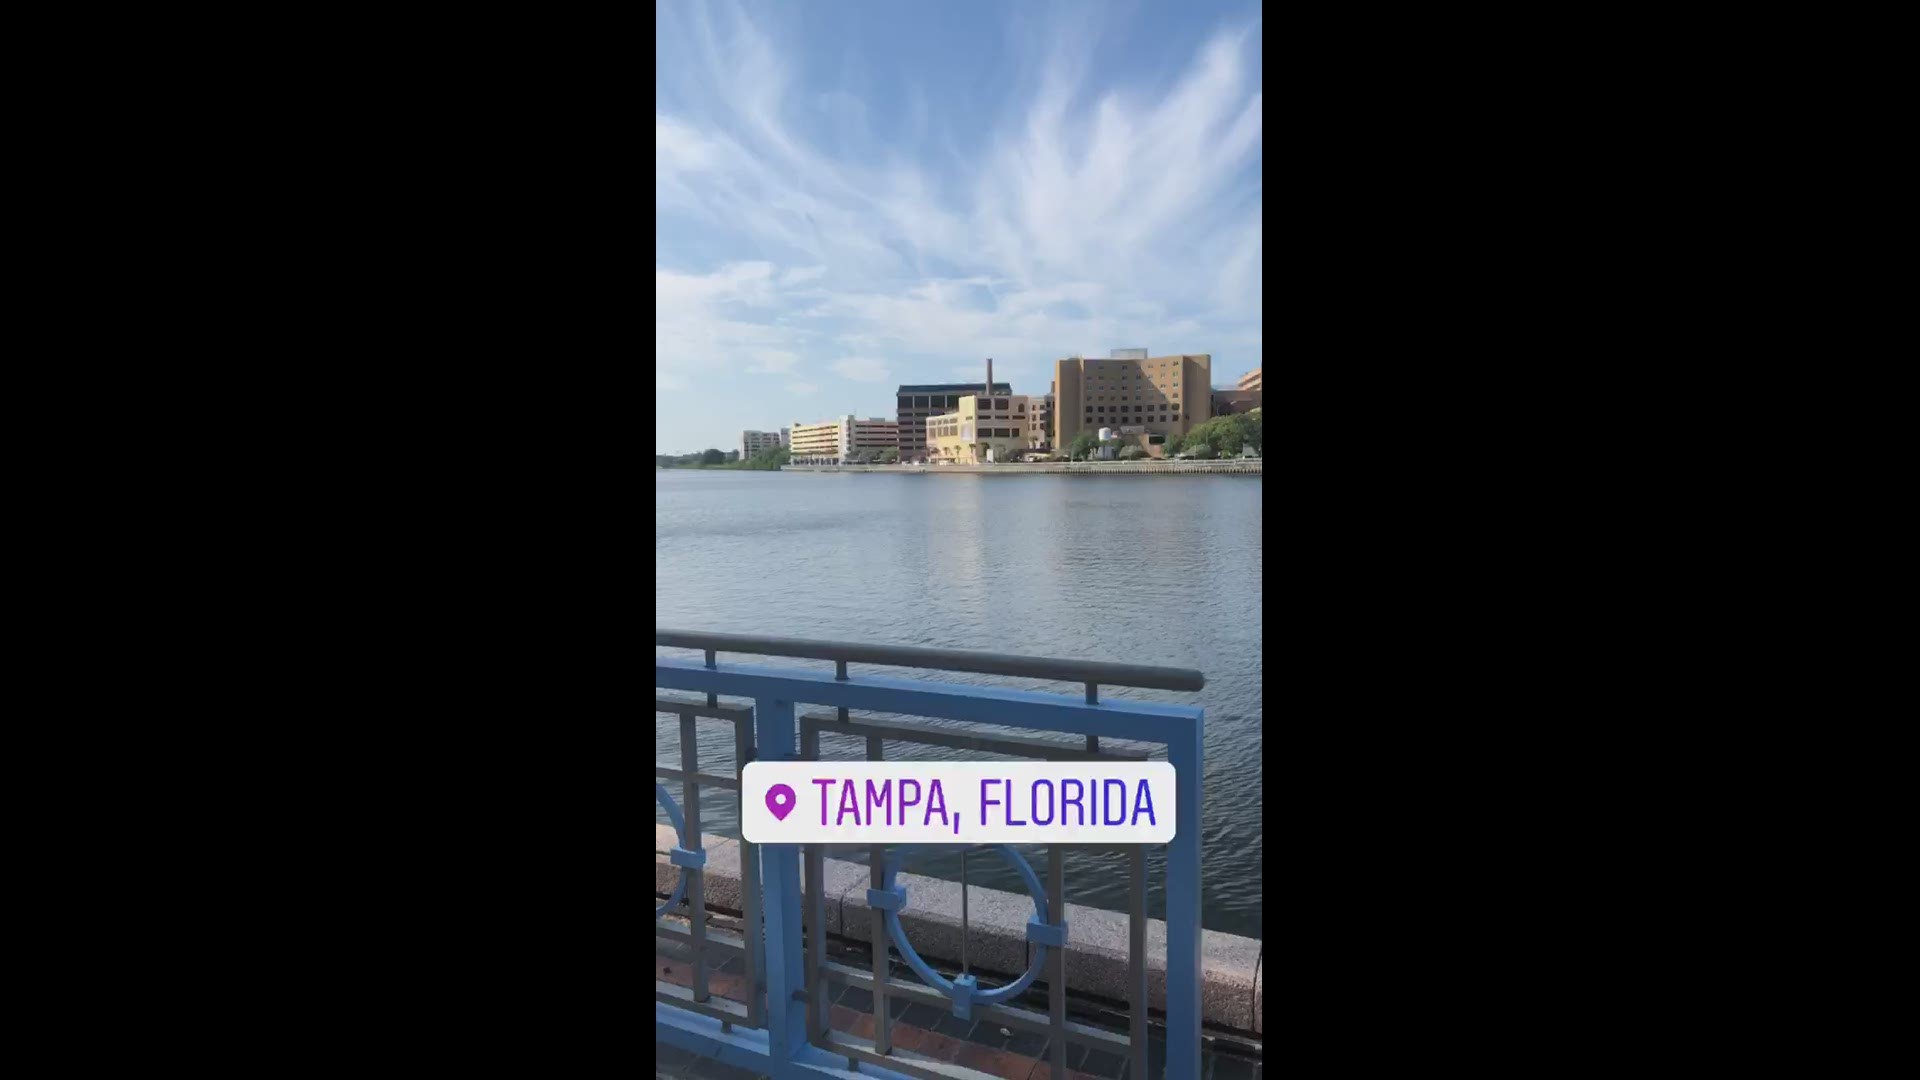 Check out the view in Tampa from Leslie Draffin's Instagram story.